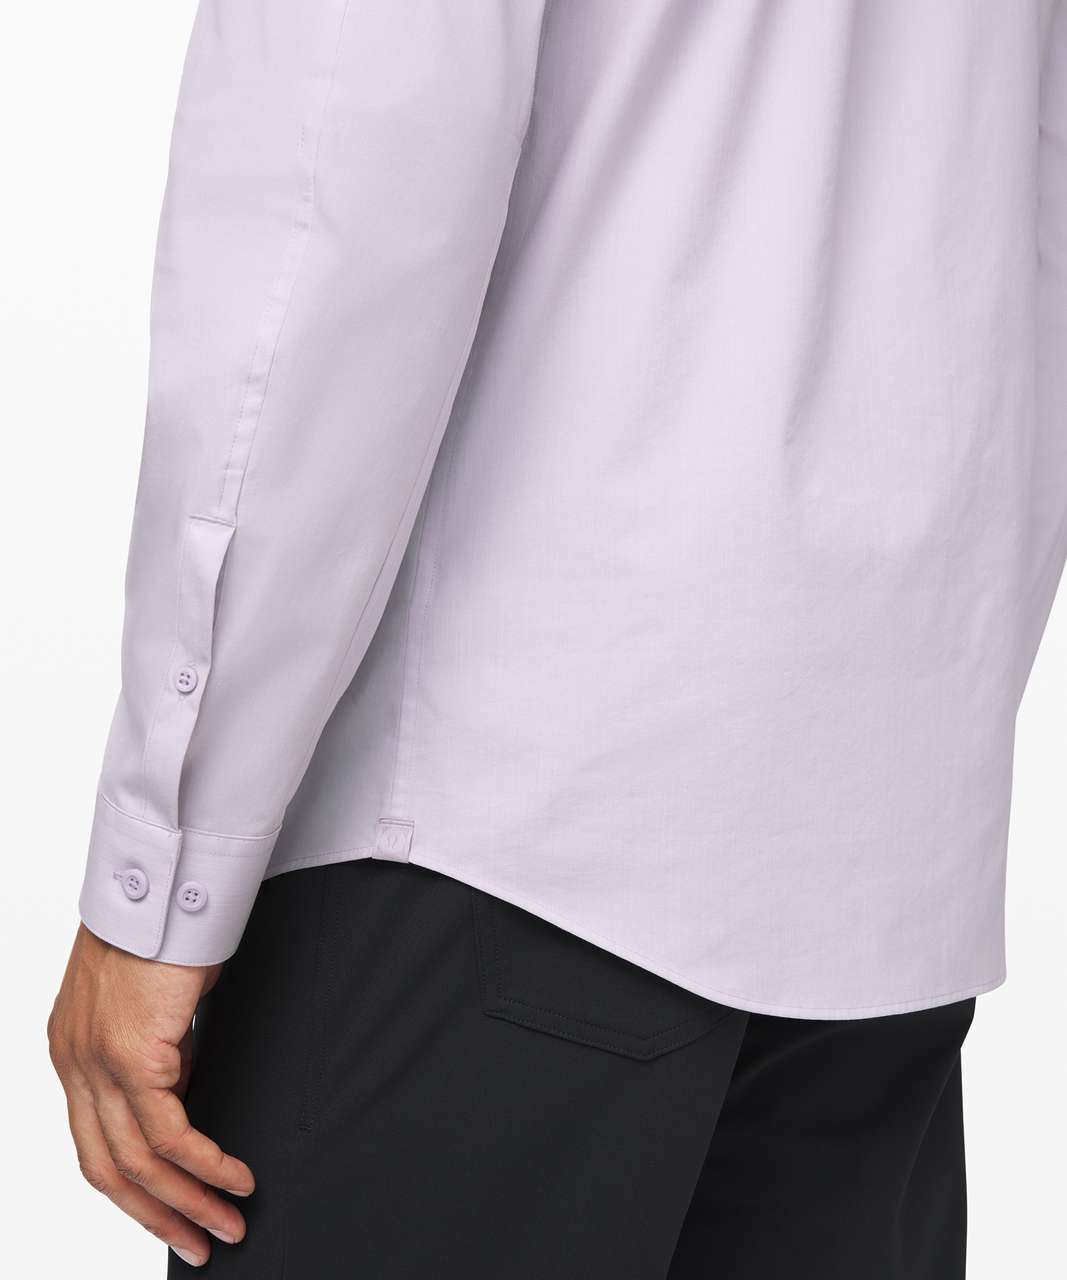 Lululemon Down to the Wire Slim Fit Long Sleeve - Heathered Faint Lavender